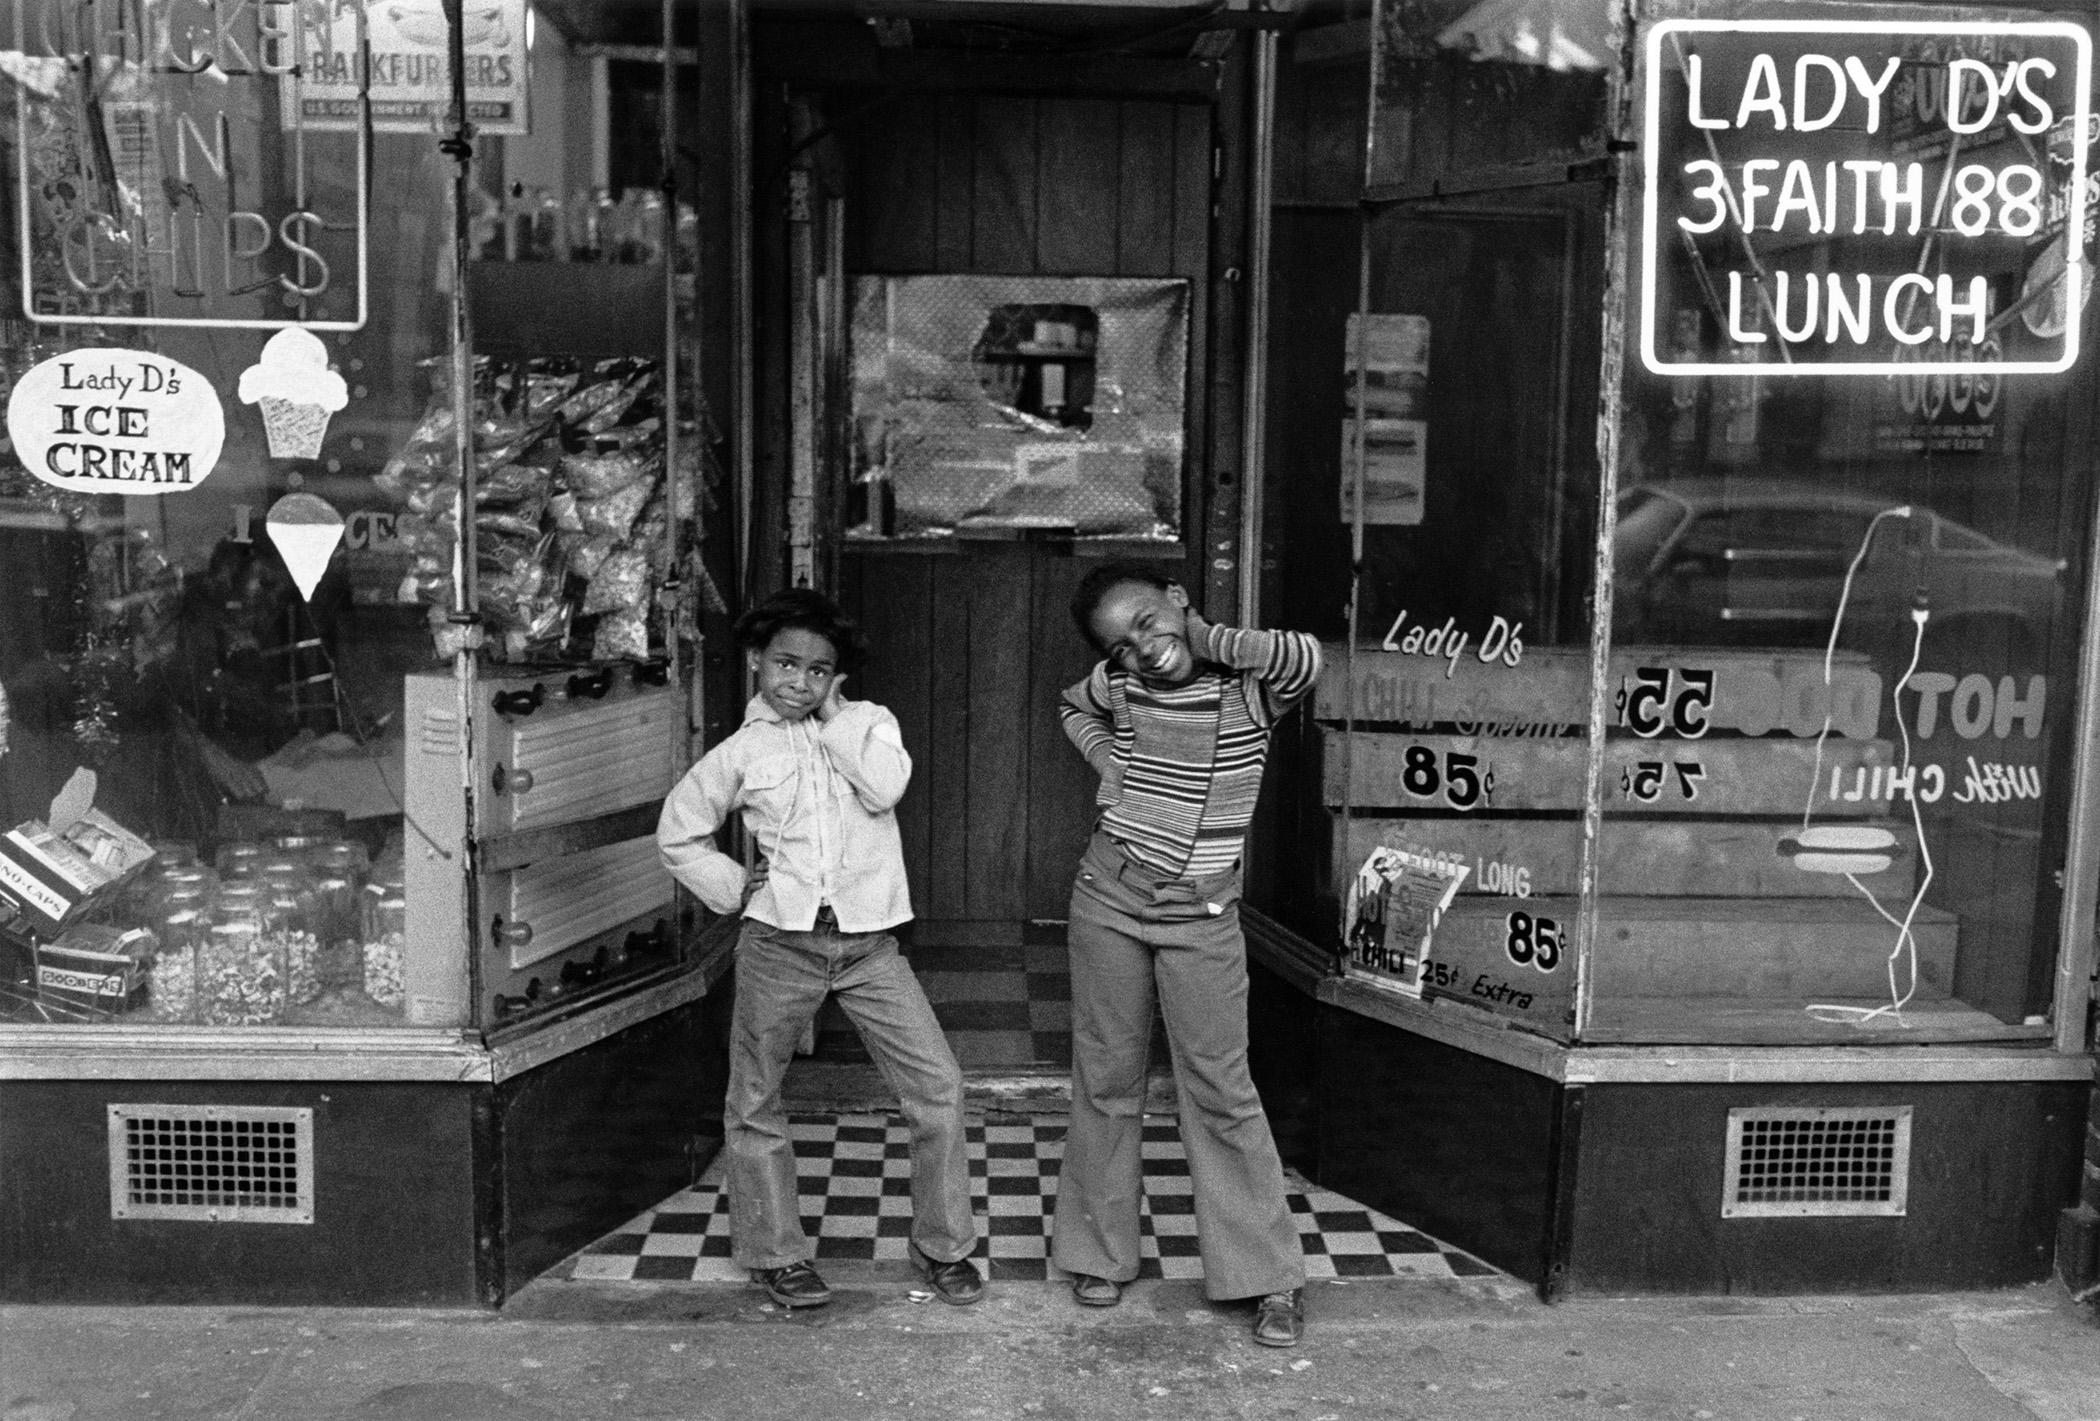 Dawoud Bey Two Girls at Lady D’s, Harlem, 1976:
“I spent five years in the mid-to-late 1970s making photographs in Harlem, New York. It was the first project I undertook at the beginning of my career. I was led back there by my family’s history in